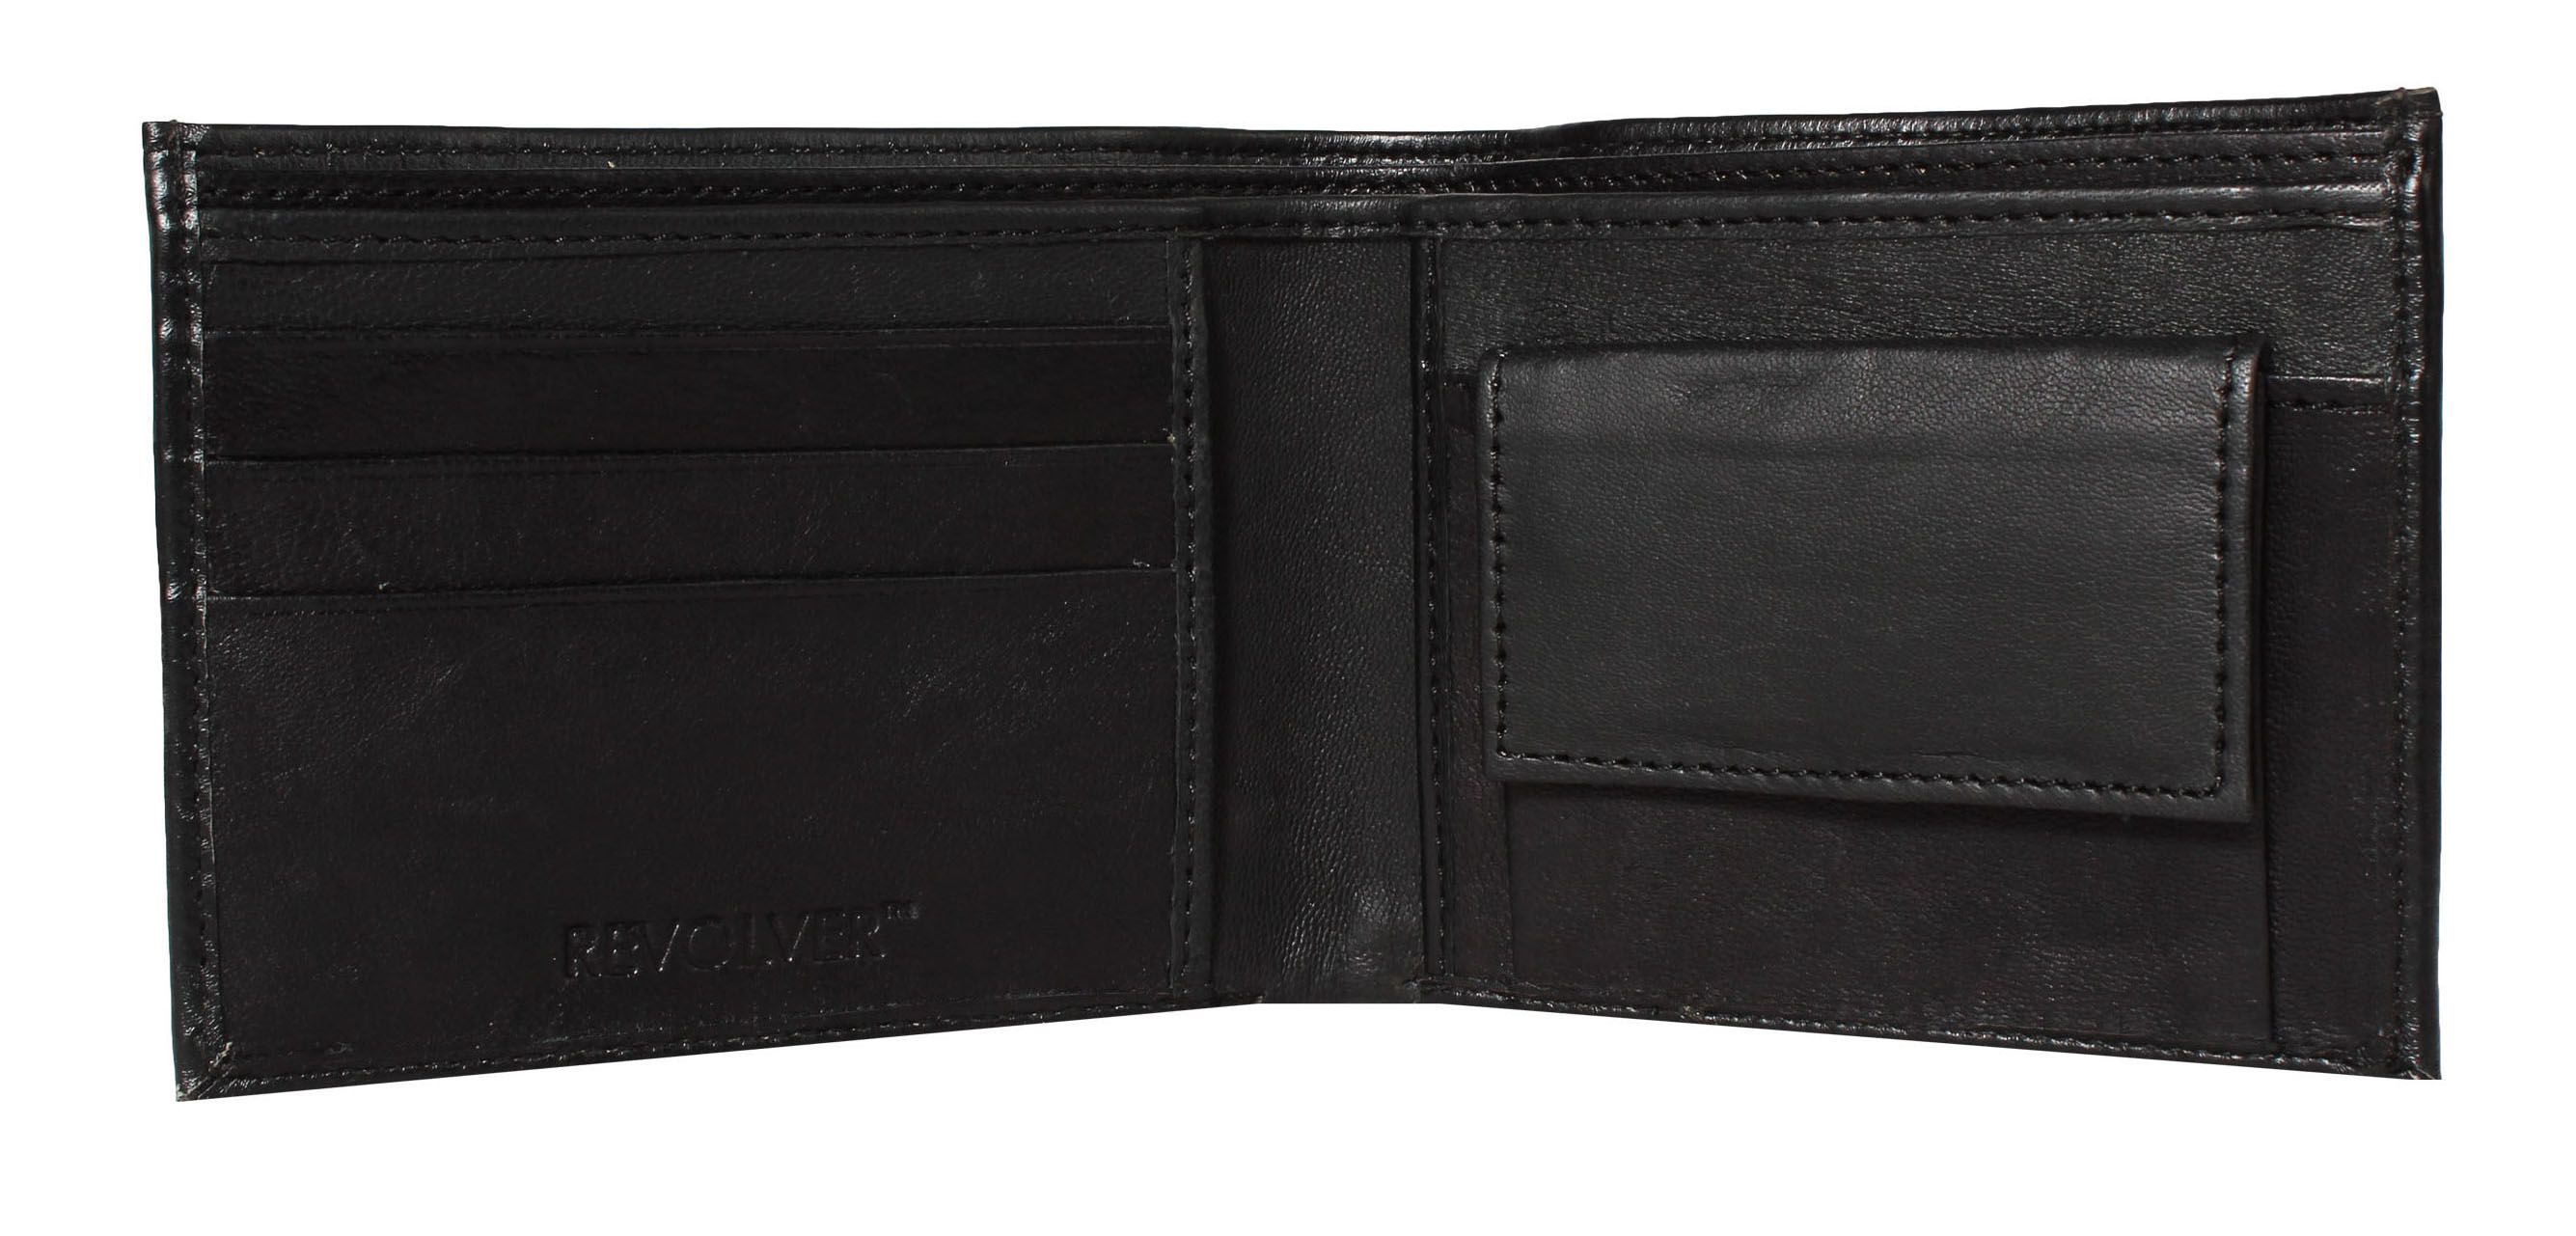 Revolver Leather Black Casual Regular Wallet: Buy Online at Low Price ...